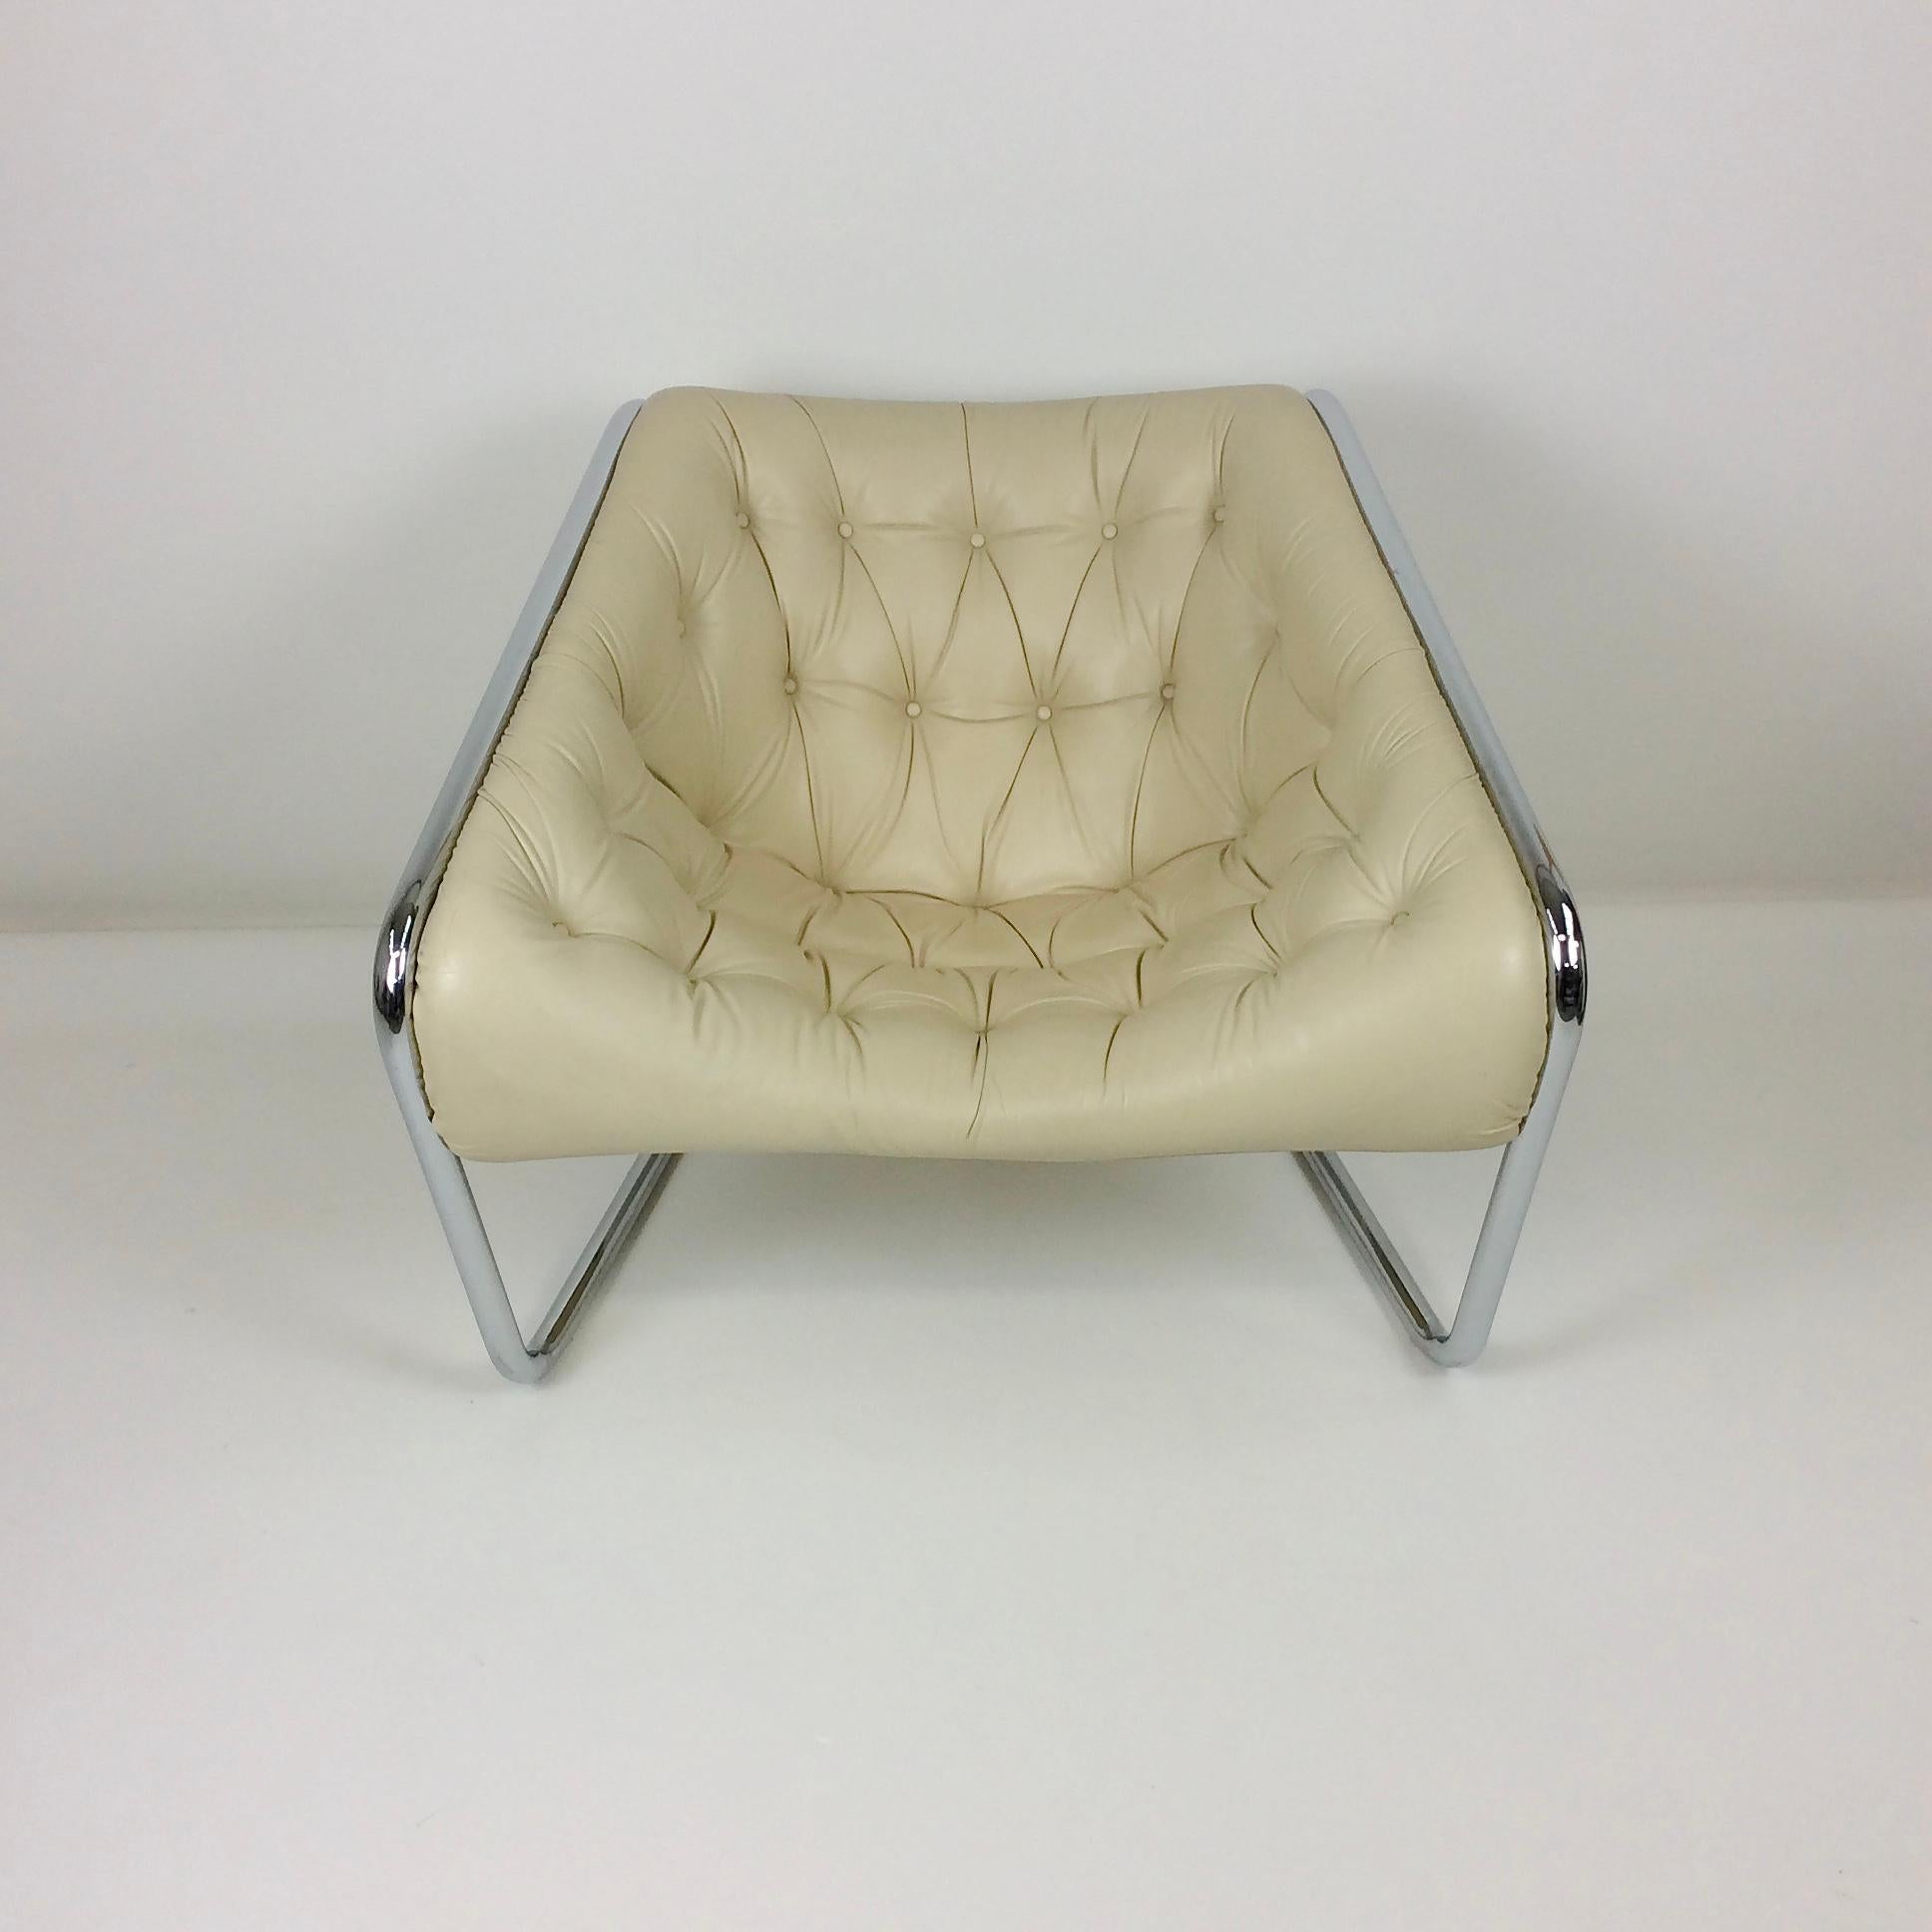 French Kwok Hoi Chan Boxer Leather Lounge Chair for Steiner, circa 1971, France